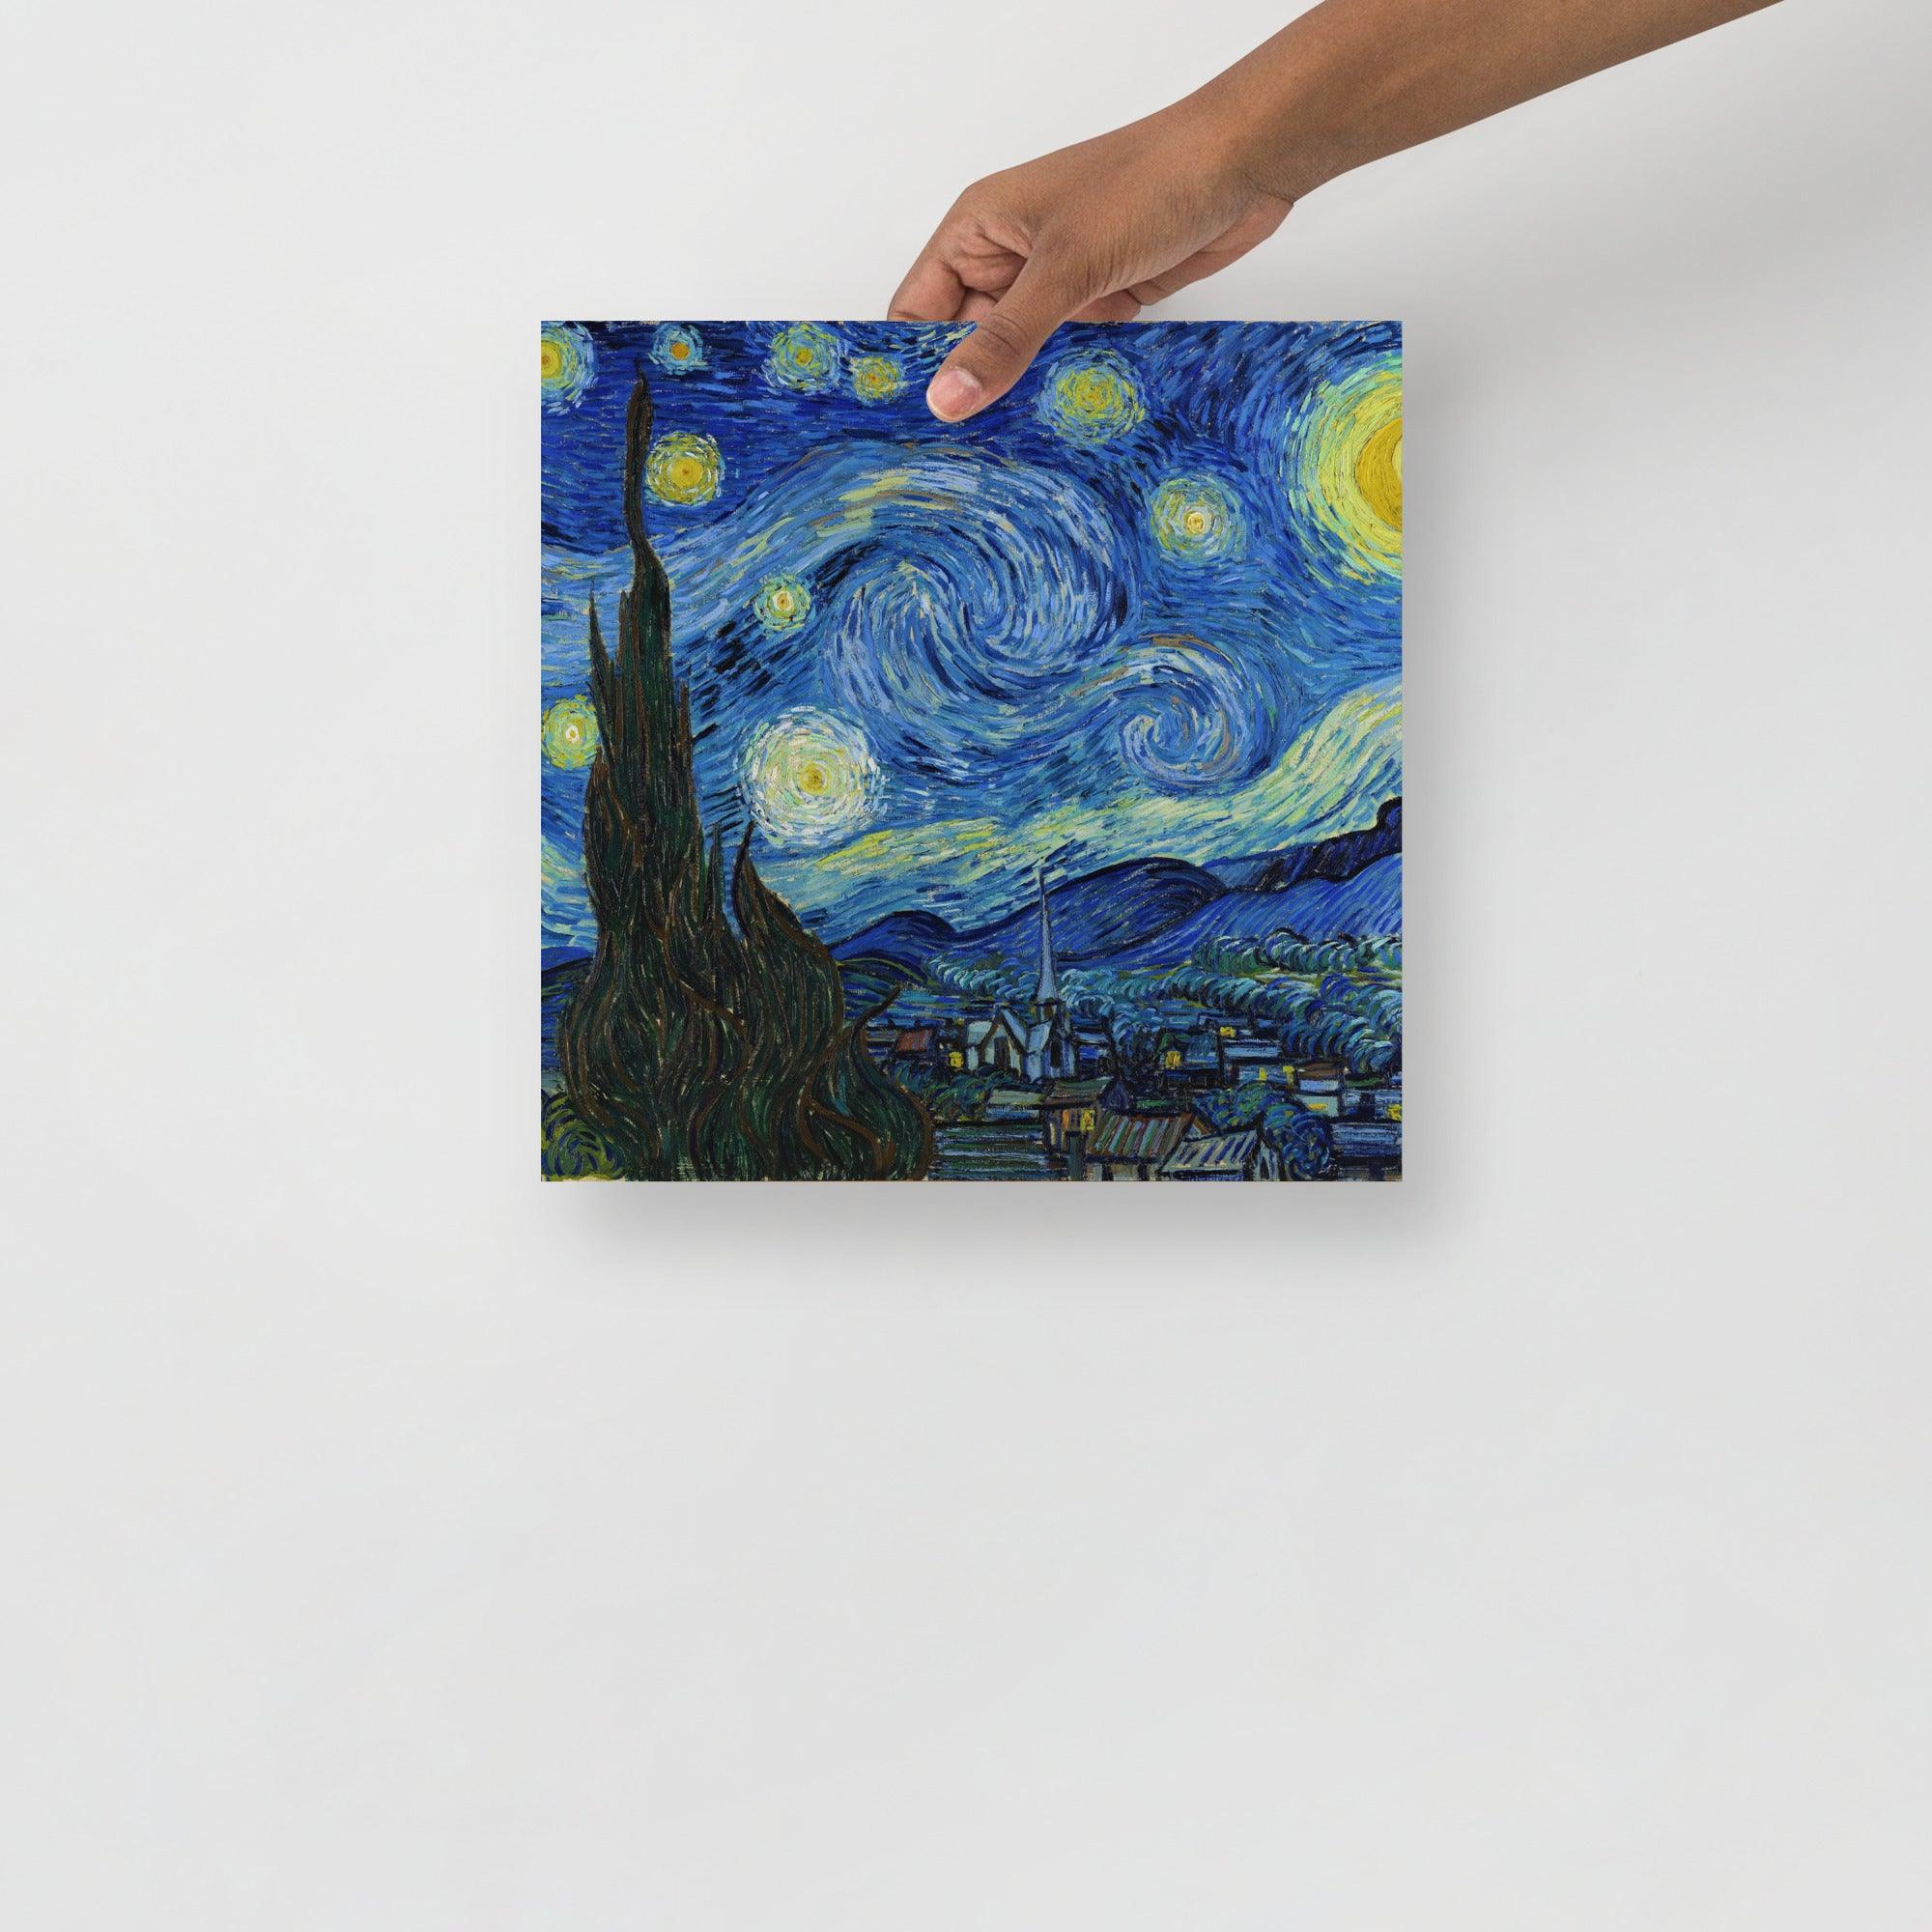 A The Starry Night by Vincent van Gogh poster on a plain backdrop in size 12x12”.